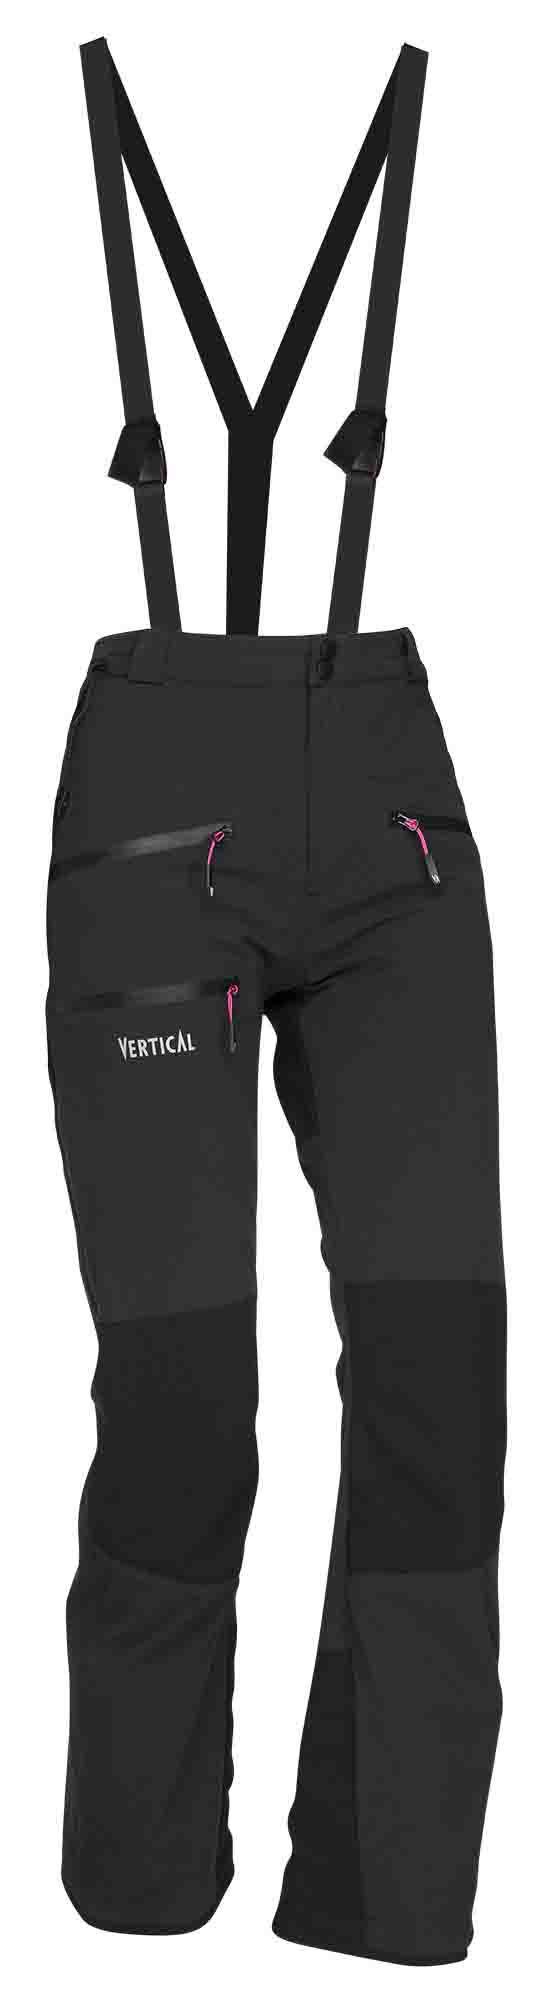 Vertical Windy Spirit MP+ Pant - Softshell trousers - Women's